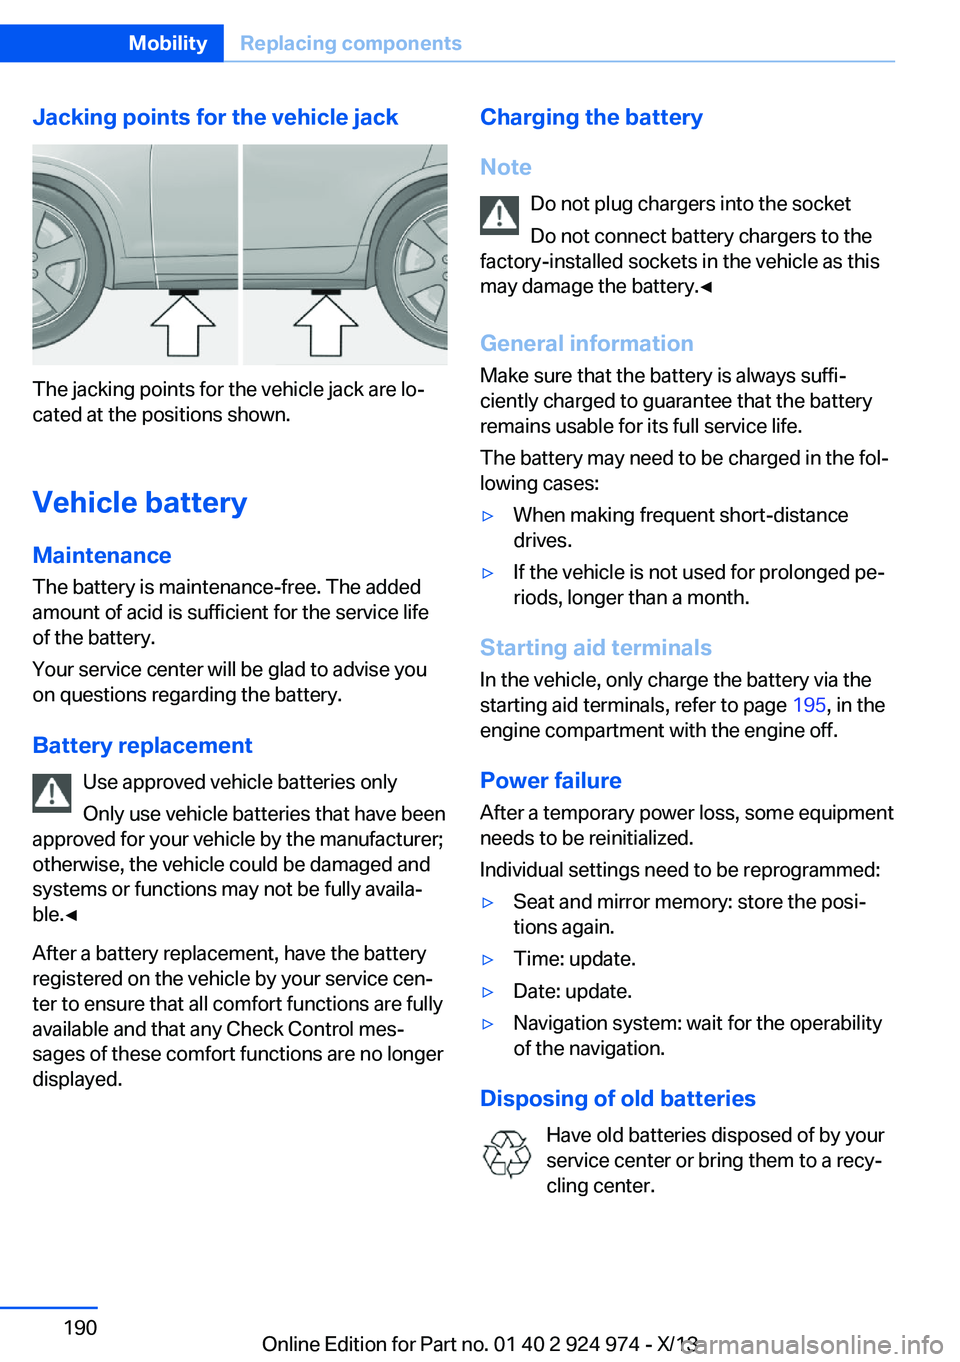 BMW 228ICOUPE 2014  Owners Manual Jacking points for the vehicle jack
The jacking points for the vehicle jack are lo‐
cated at the positions shown.
Vehicle battery Maintenance
The battery is maintenance-free. The added
amount of aci